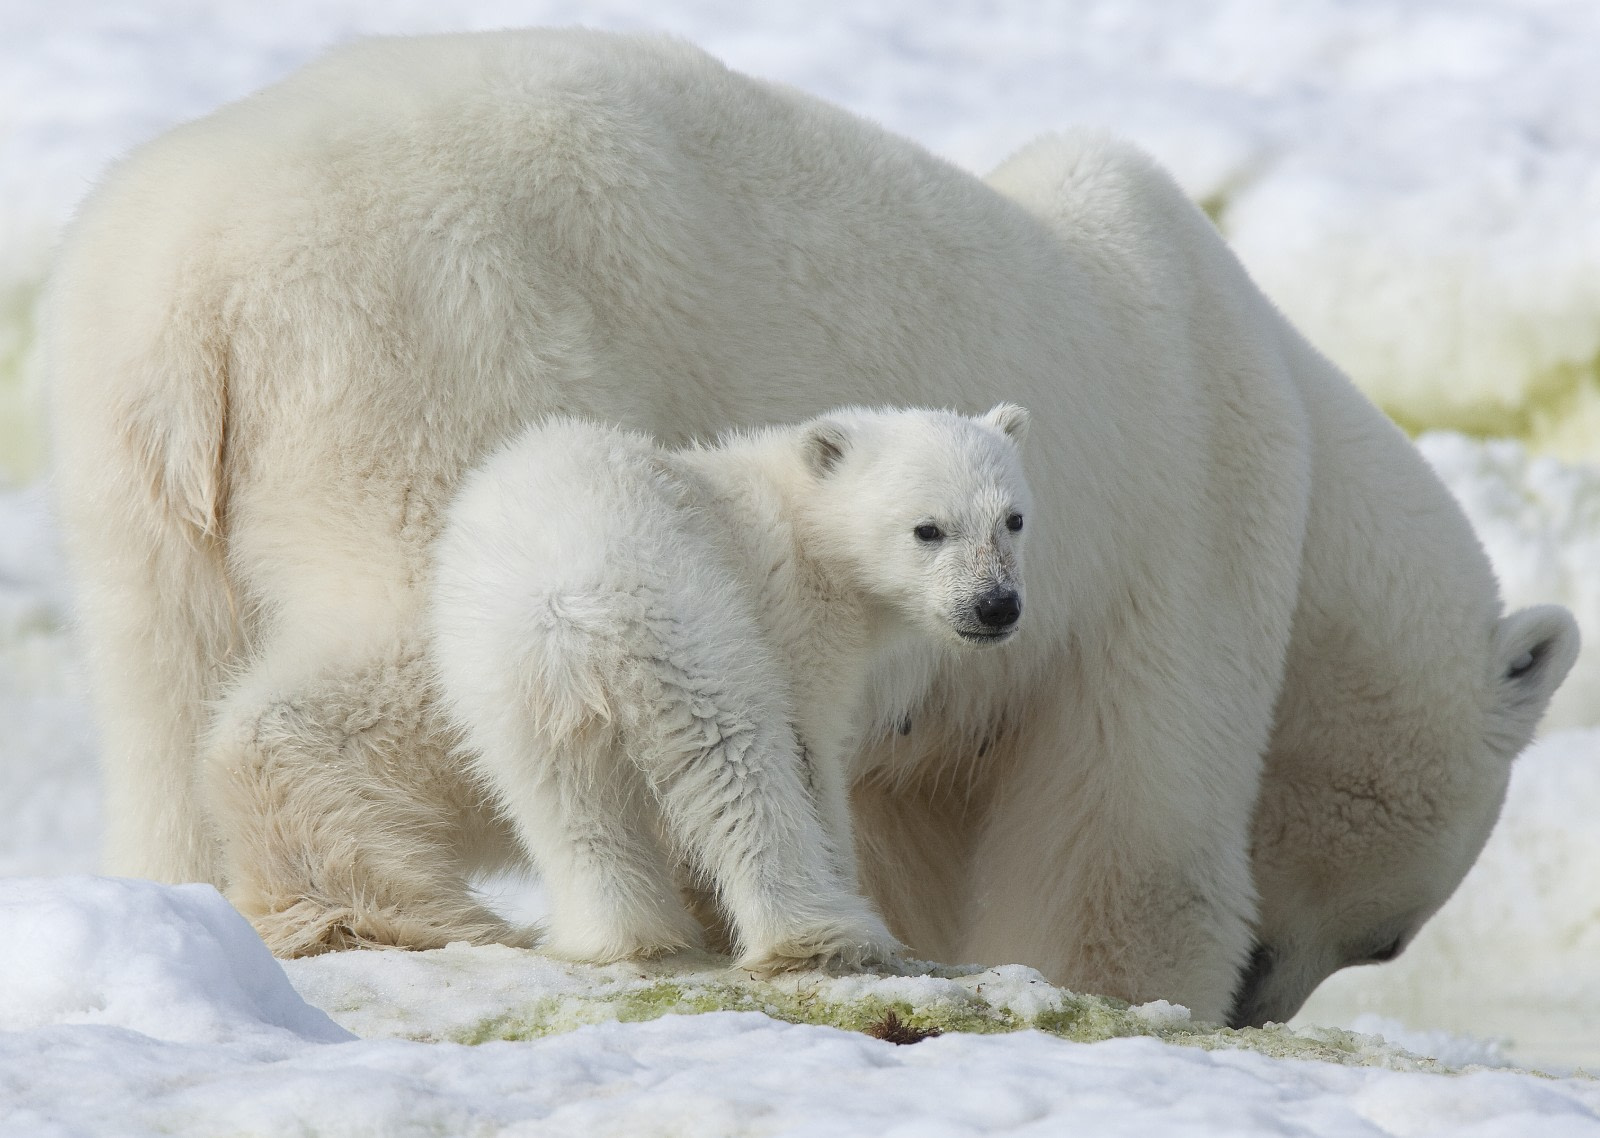 Can we save polar bears by moving them to Antarctica? - Eco Kids